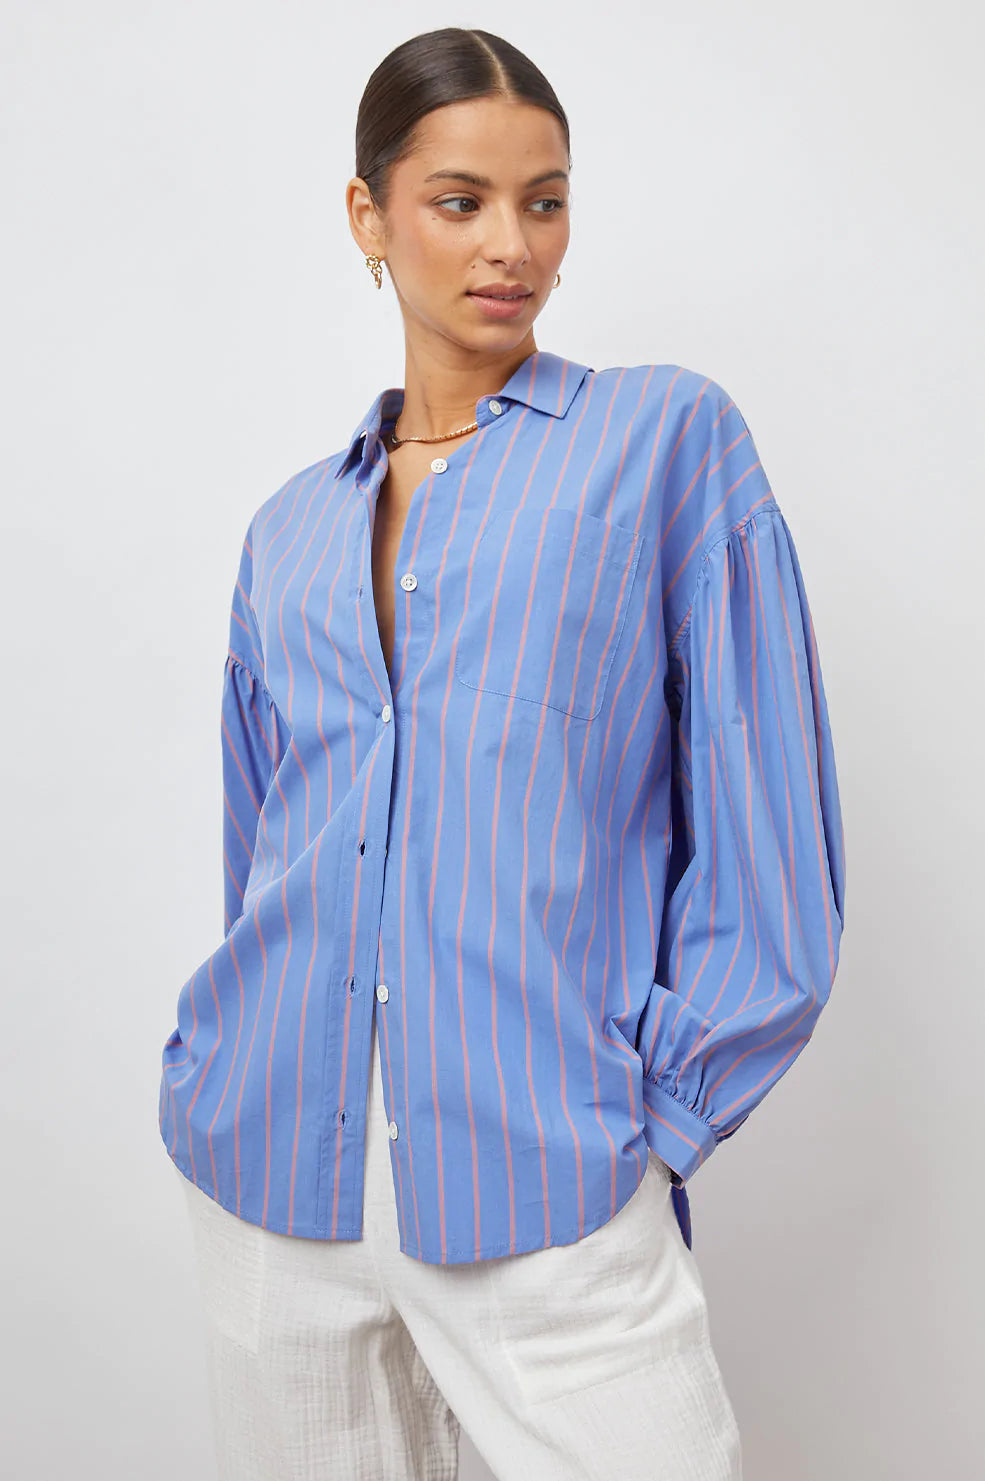 Royal blue and pink striped shirt with classic collar full length placket and white plastic button fastening long sleeves with gathering at the shoulders and cuffs